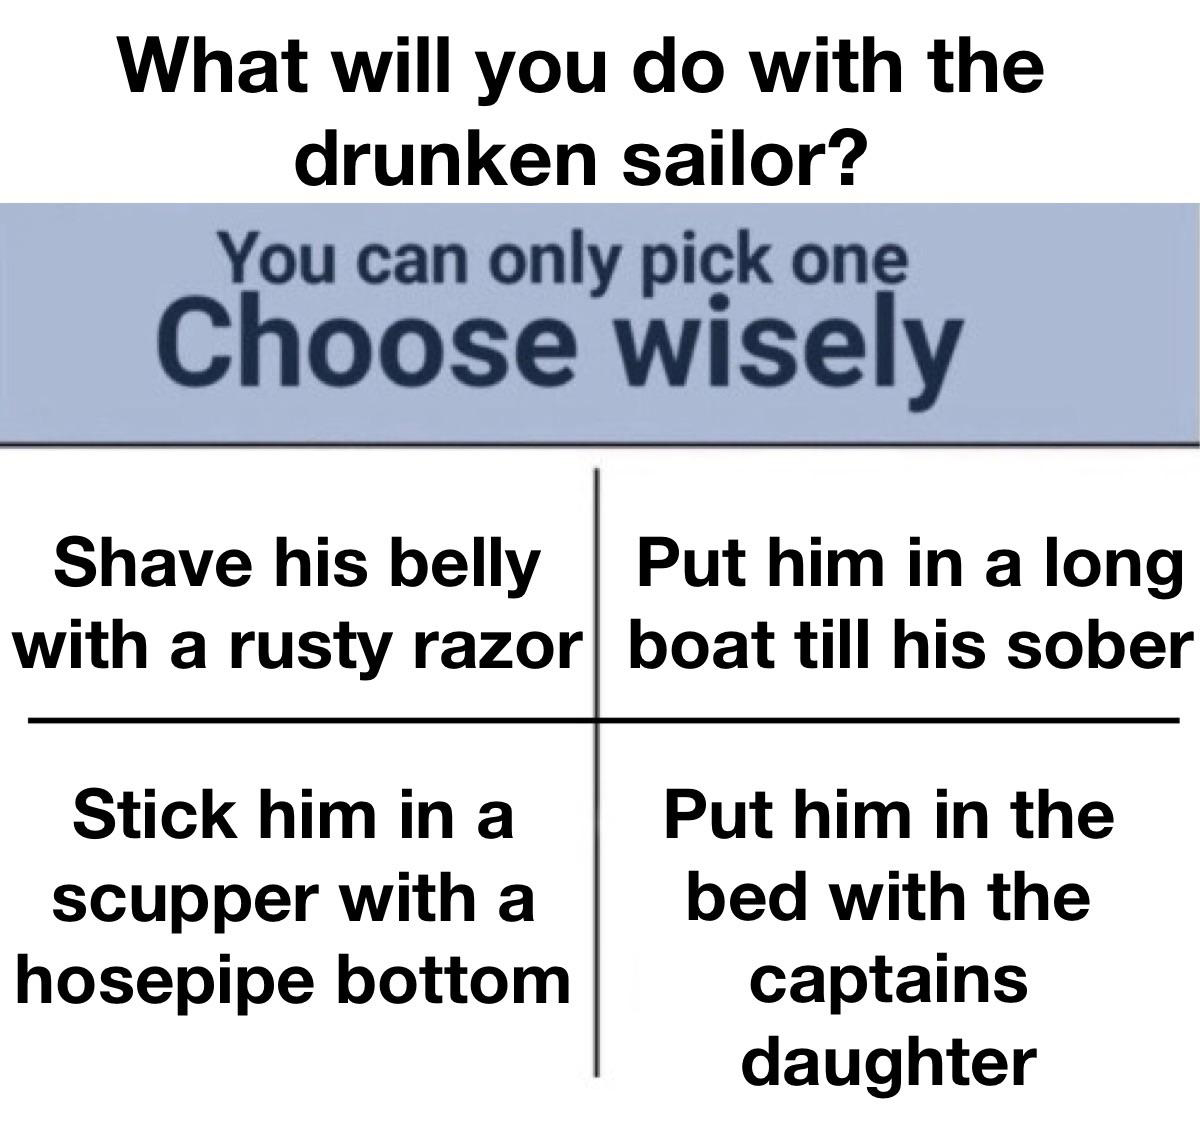 dank memes - funny memes - angle - What will you do with the drunken sailor? You can only pick one Choose wisely Shave his belly with a rusty razor Stick him in a scupper with a hosepipe bottom Put him in a long boat till his sober Put him in the bed with